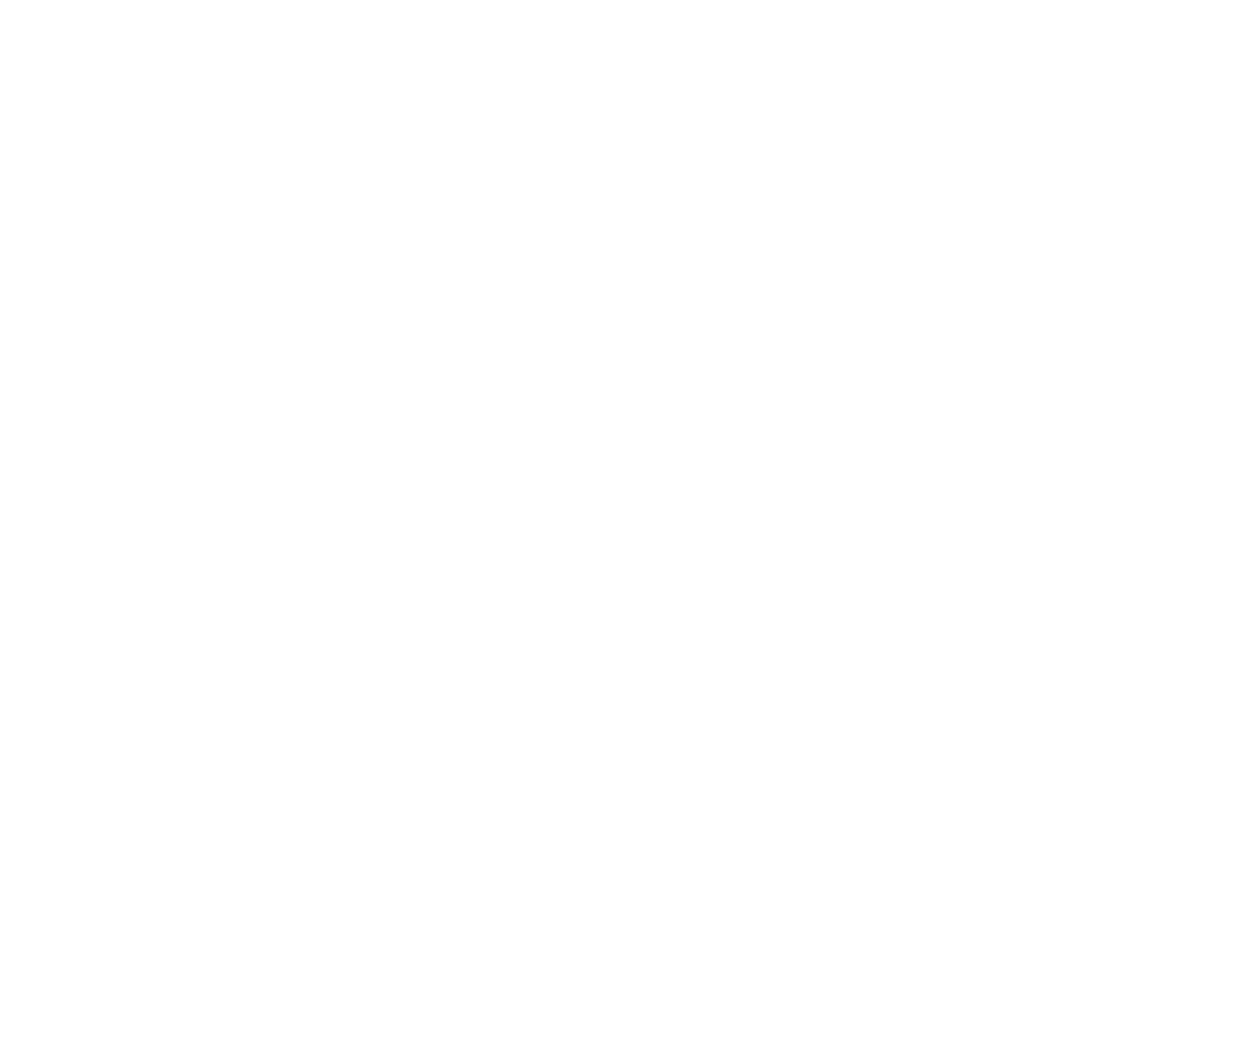 Currently purple beans, ‘cute cumbers’, corn, beans, strawberries, basil, zucchinis and multiple species (and colours...